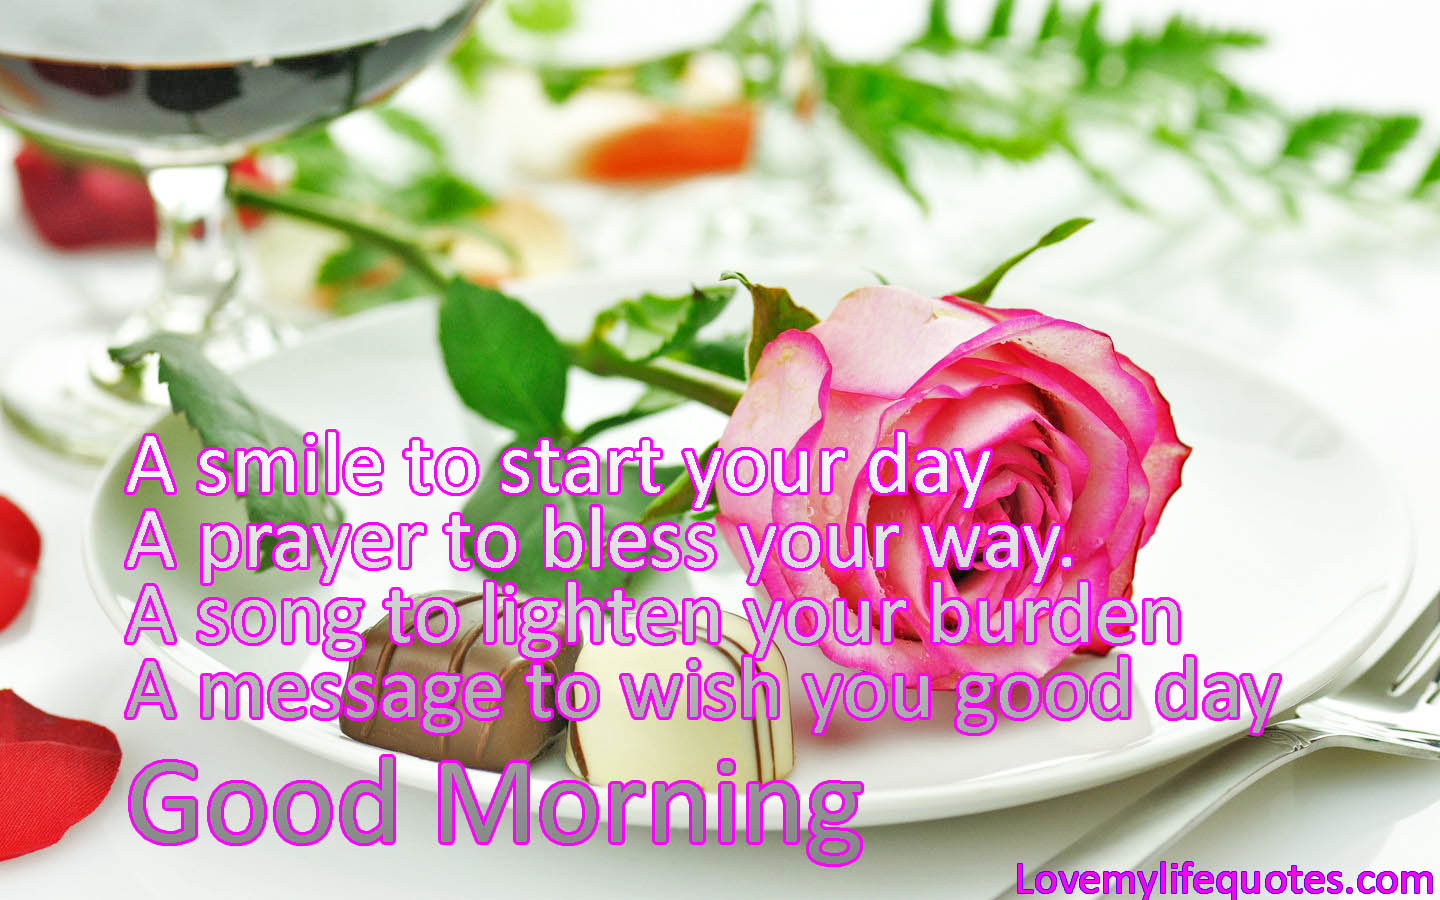 A smile to start your day - Sweet Good Morning Messages for Girlfriend